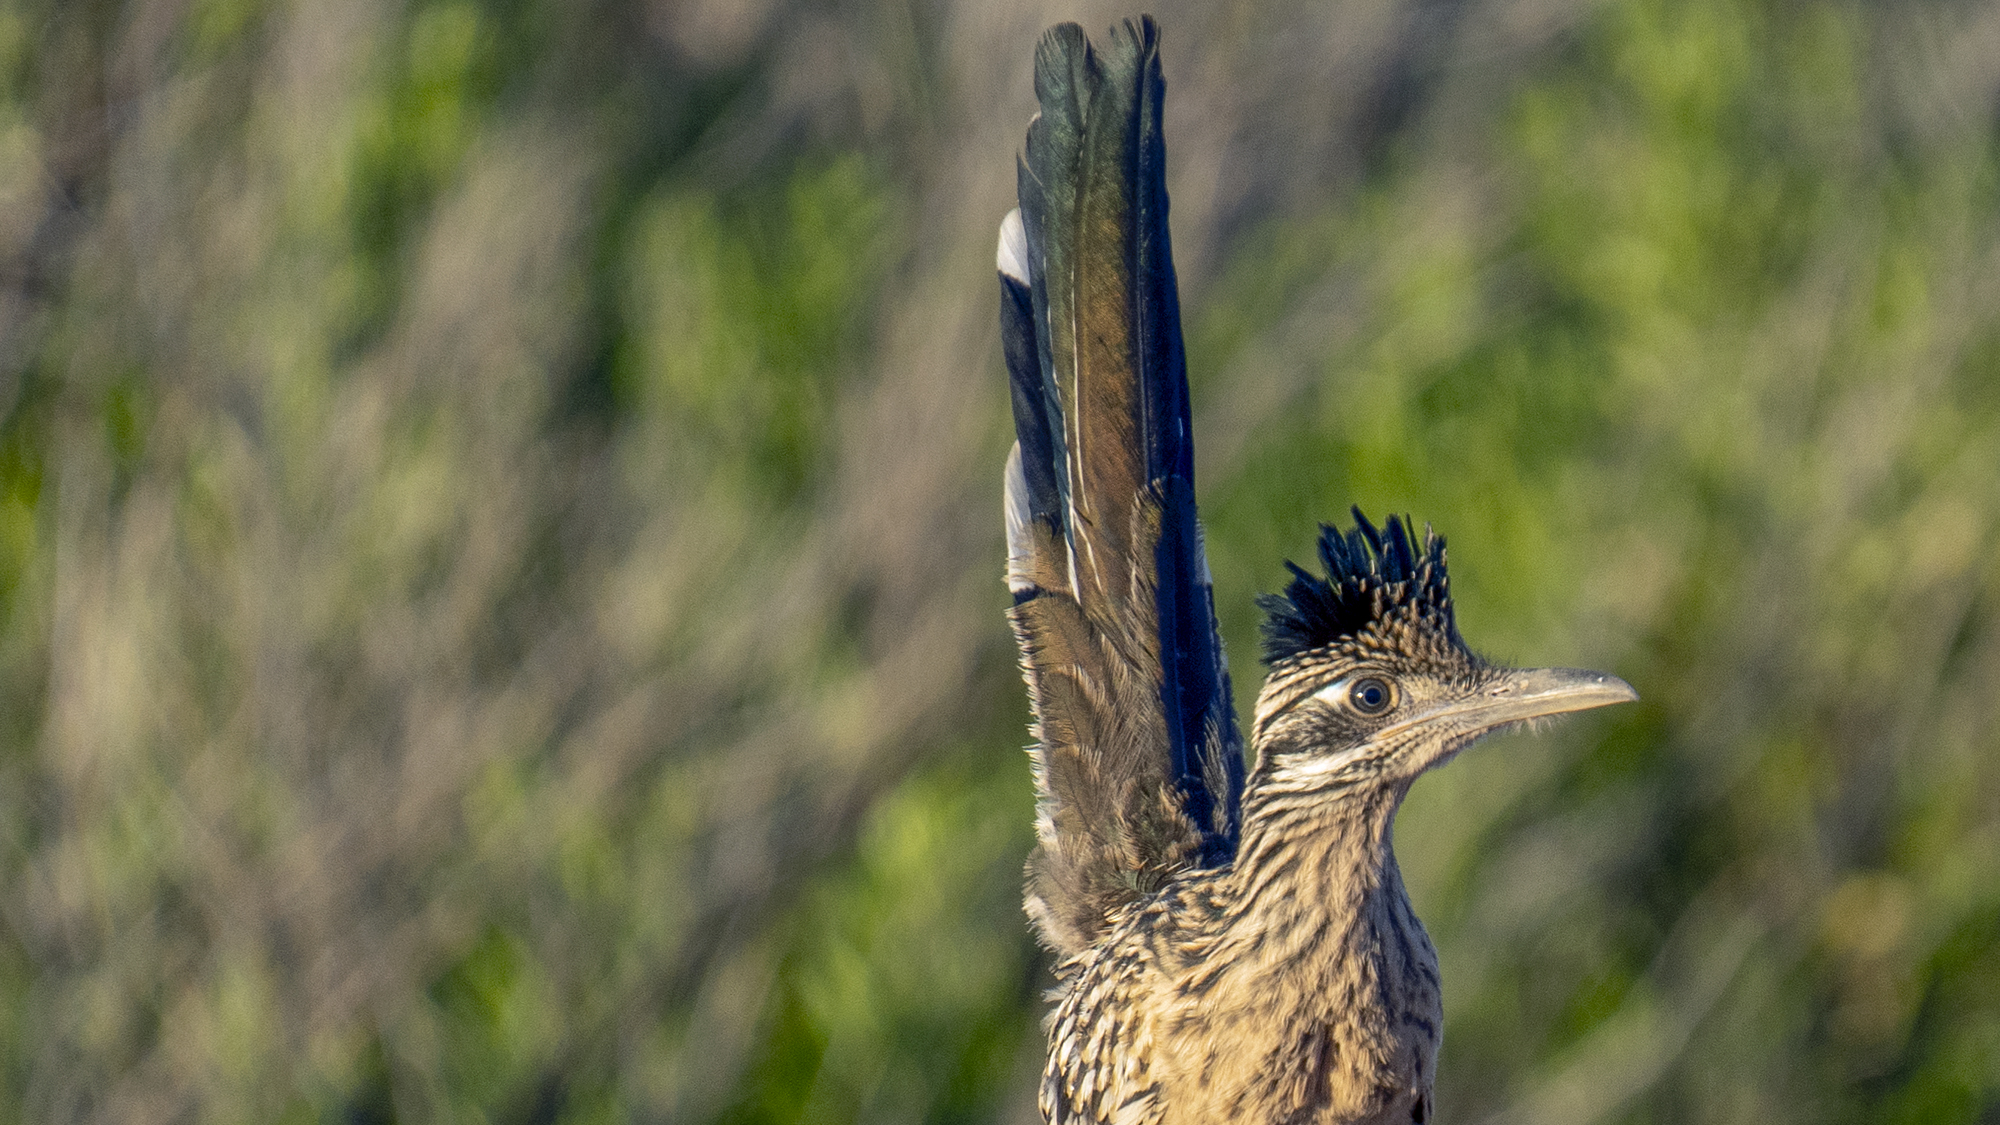 Greater roadrunner, facts and photos